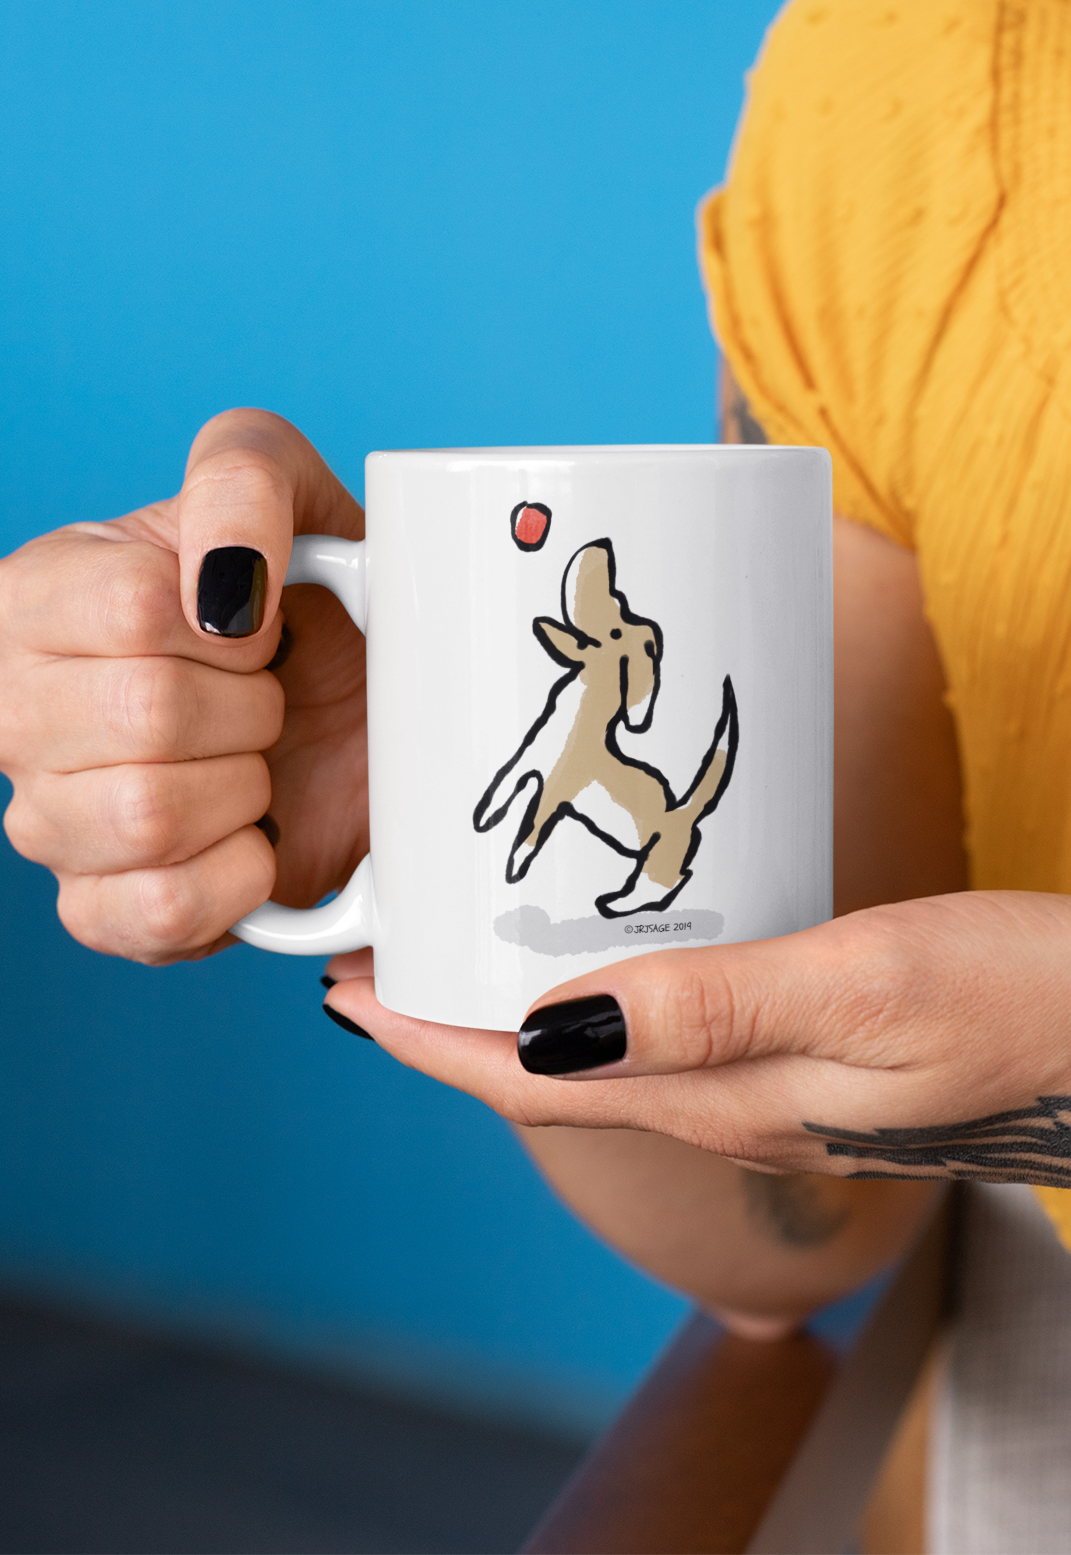 A woman holding a White Hector and Bone Mug with illustration of a Cute Jumping Do